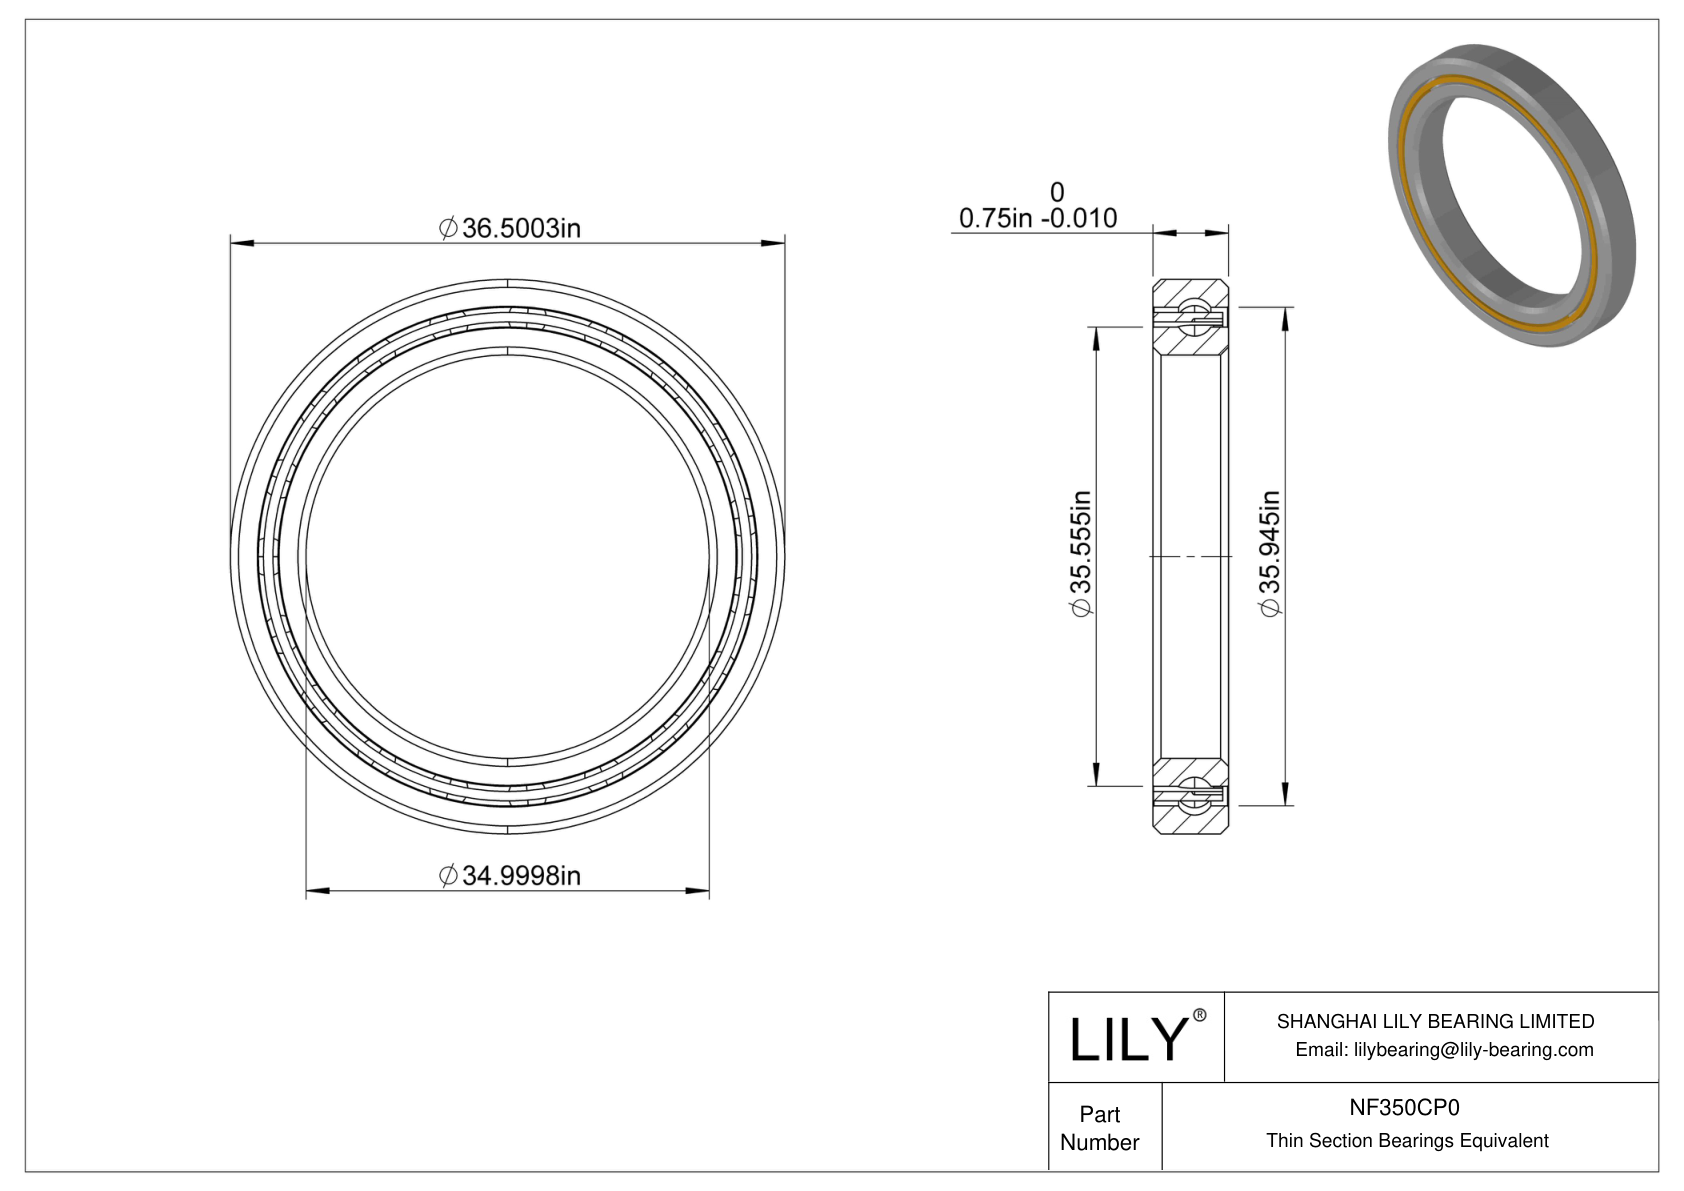 NF350CP0 Constant Section (CS) Bearings cad drawing